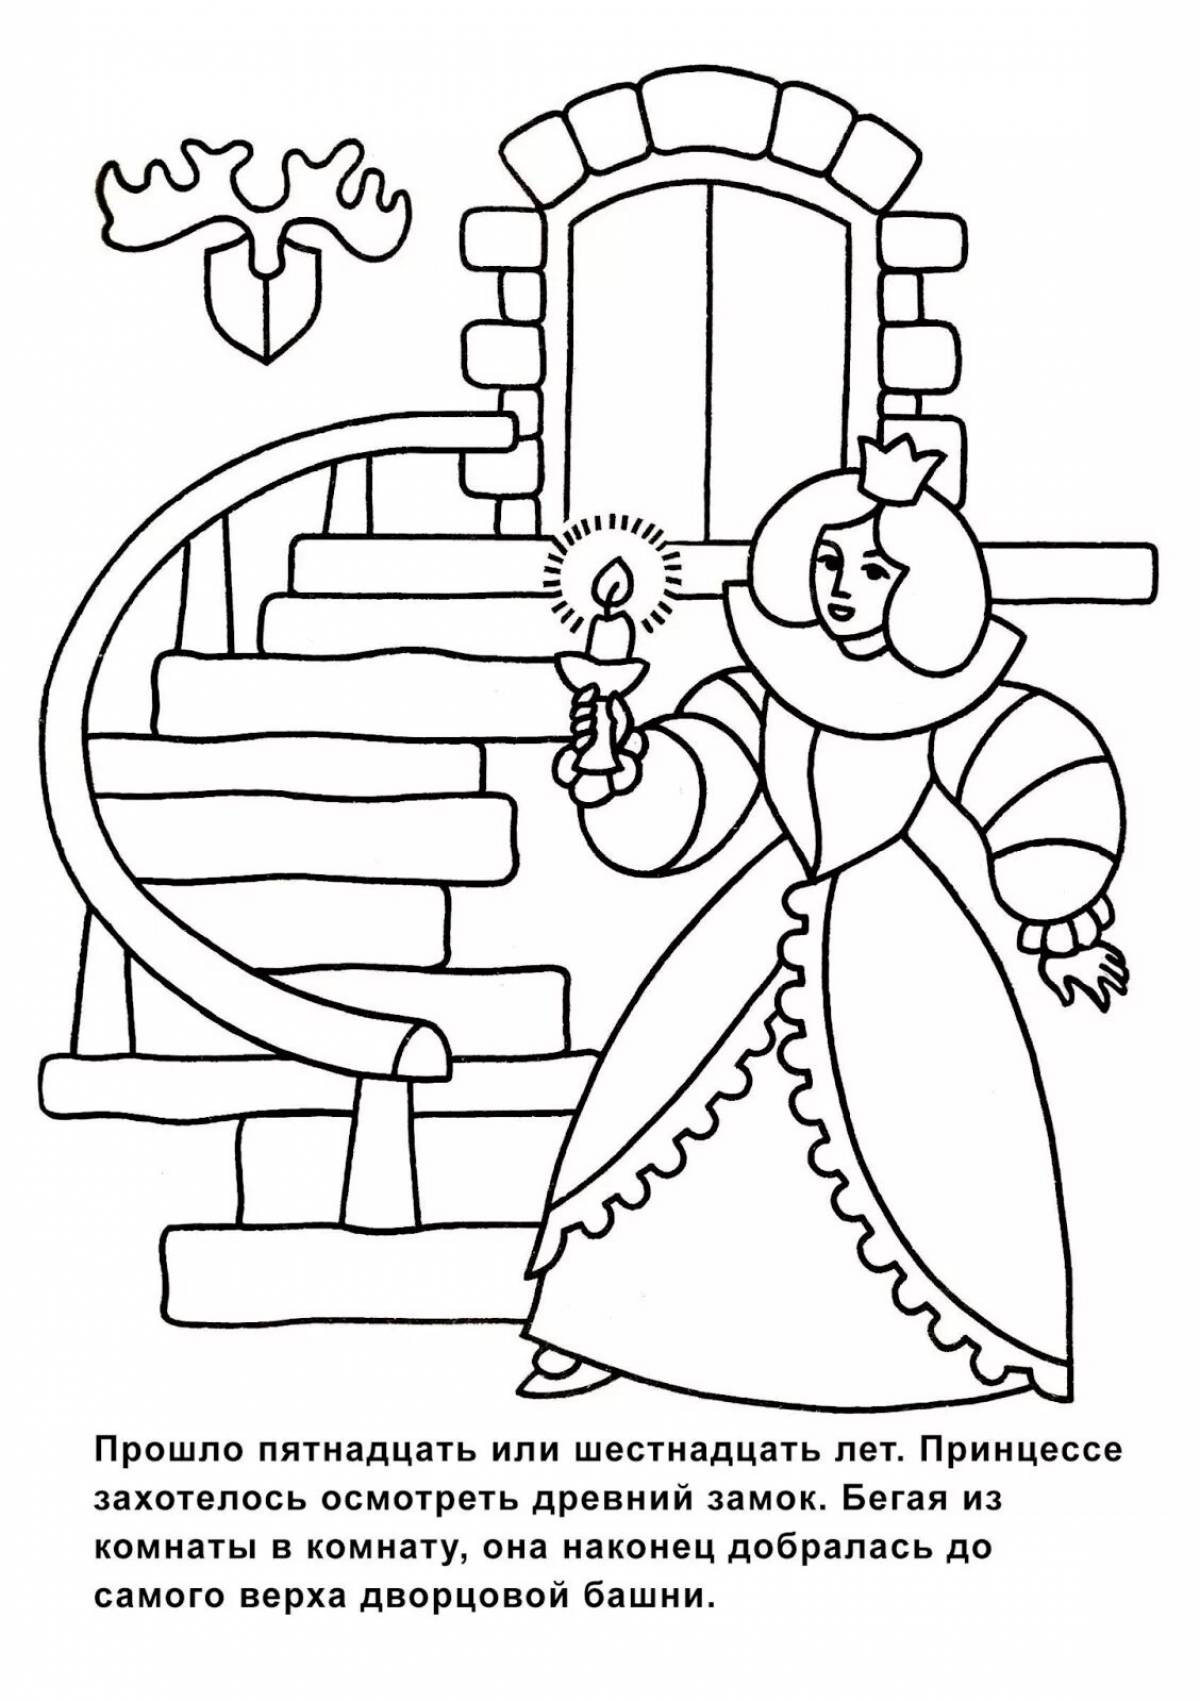 Spicy coloring book from Perrault's tales